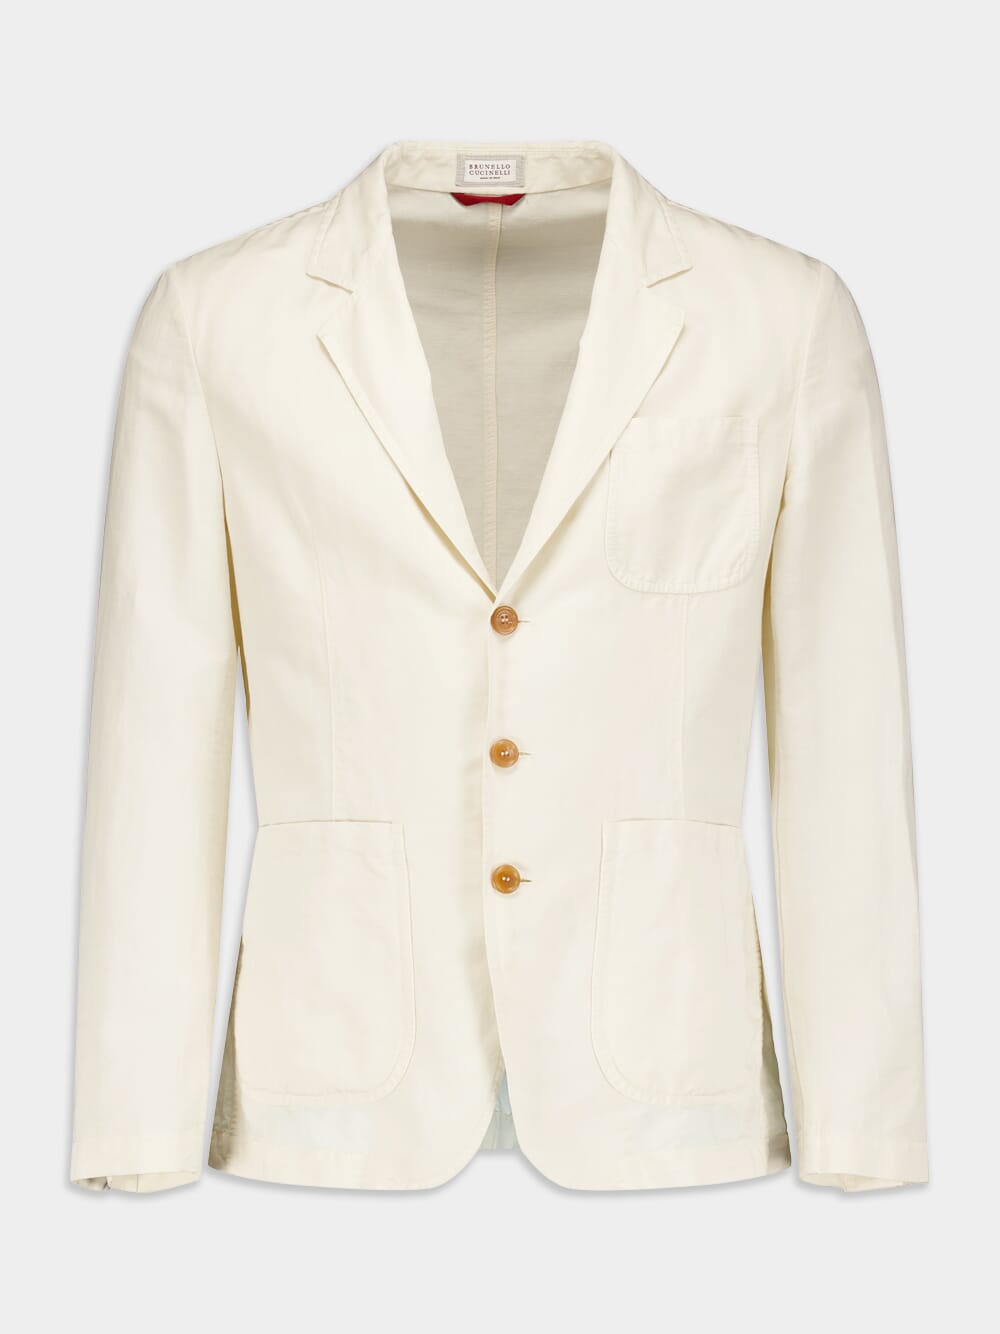 Brunello CucinelliButtoned Linen Jacket at Fashion Clinic